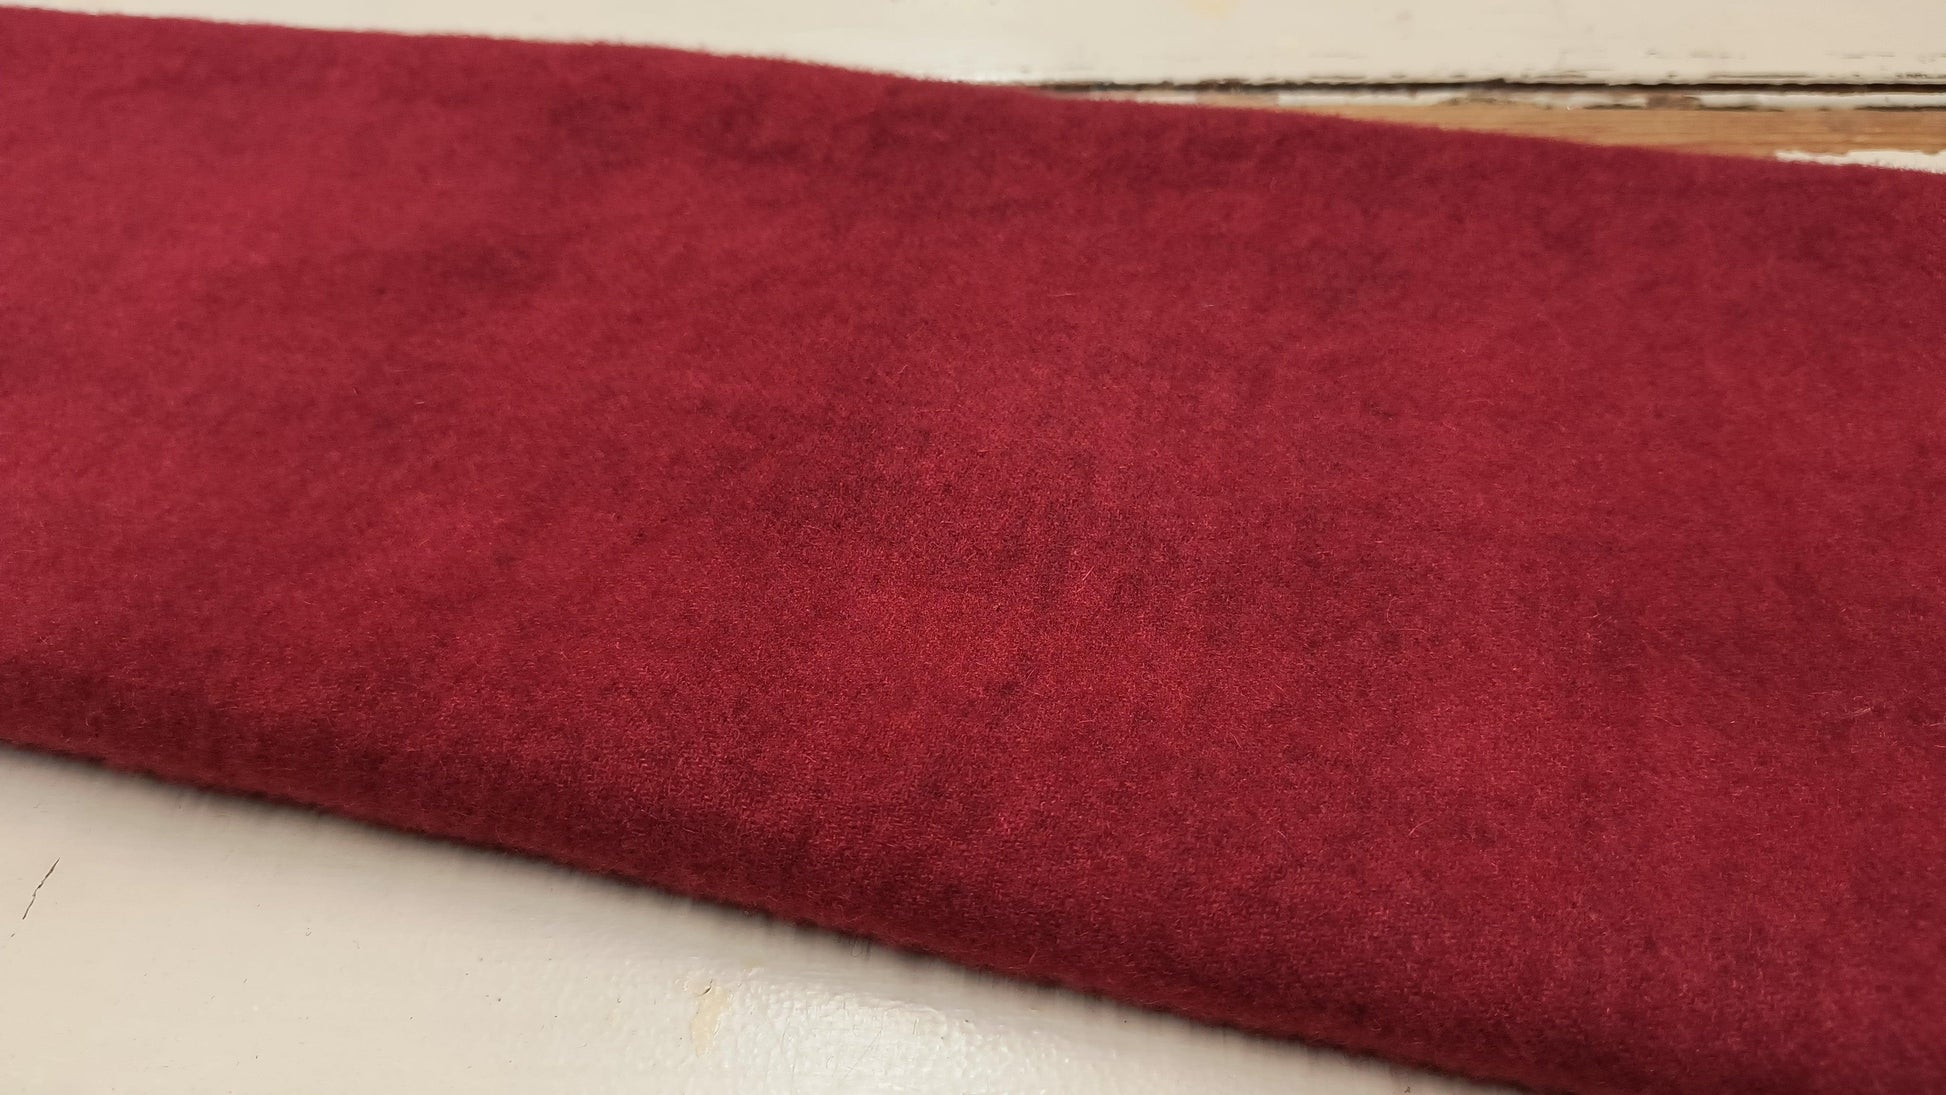 CHILI PEPPER (Mottled) Hand Dyed Plaid Wool (Light) - All About Ewe Wool Shop